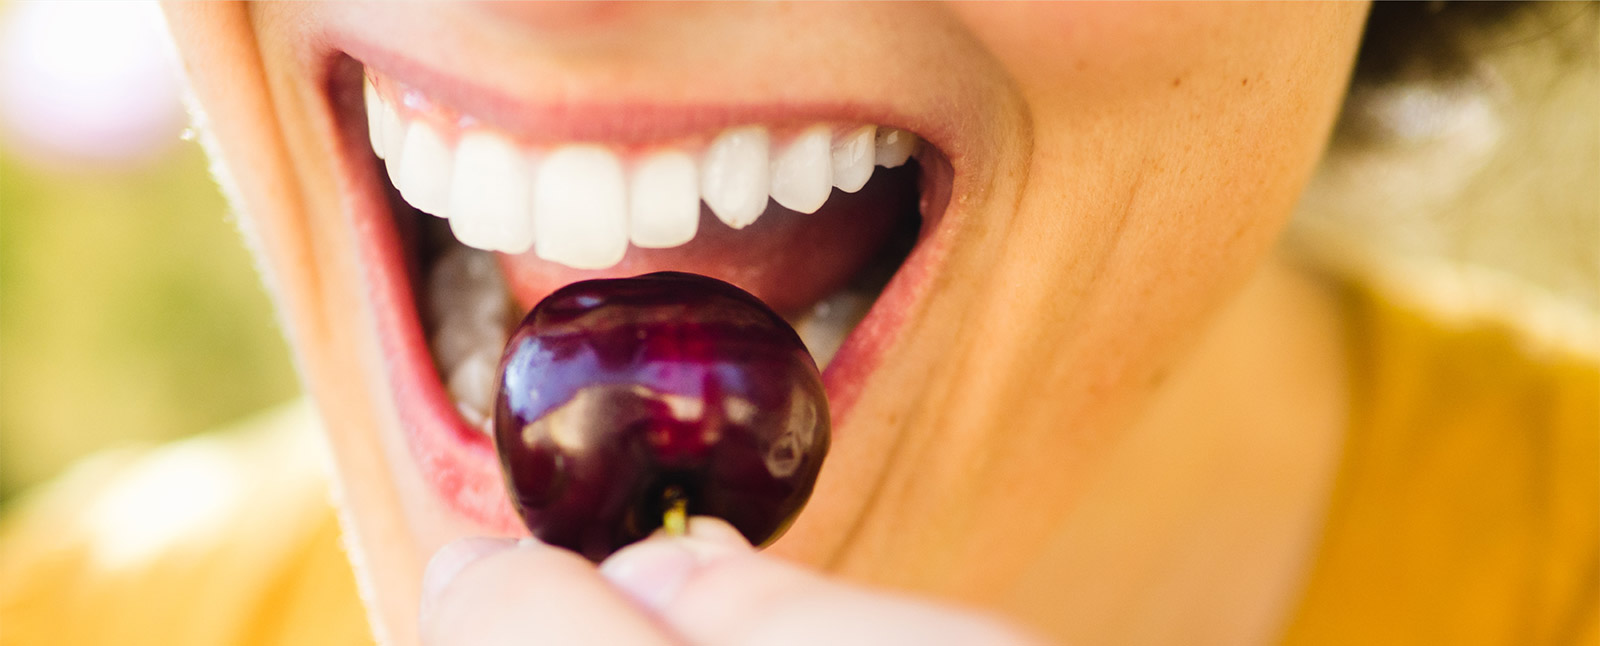 woman's mouth biting cherry